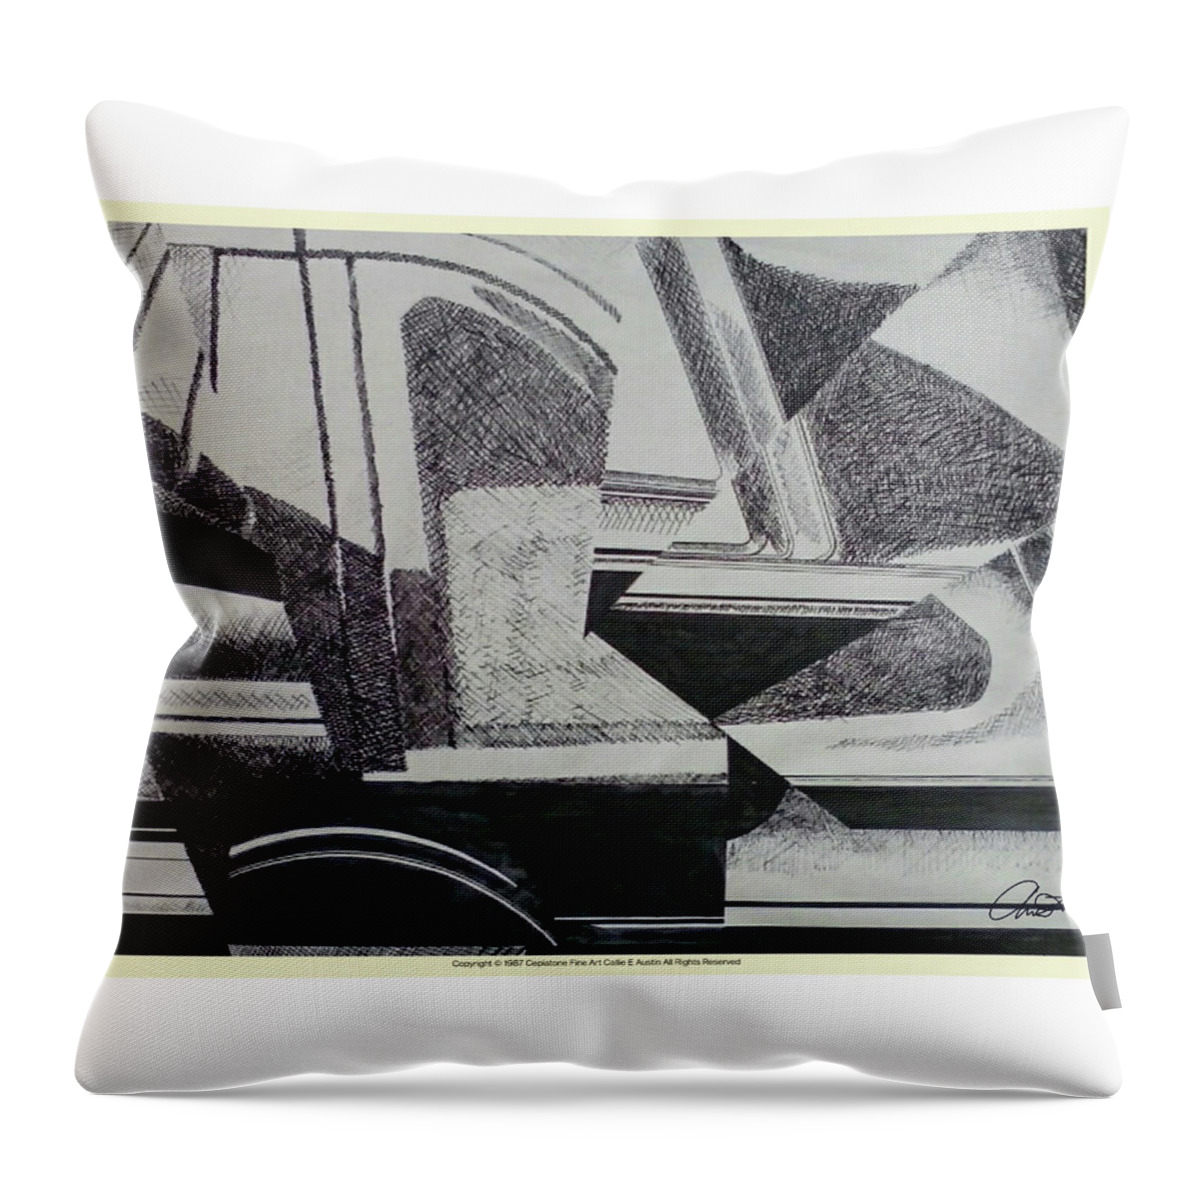 Cadillac Throw Pillow featuring the drawing Cadillac cubism by Cepiatone Fine Art Callie E Austin